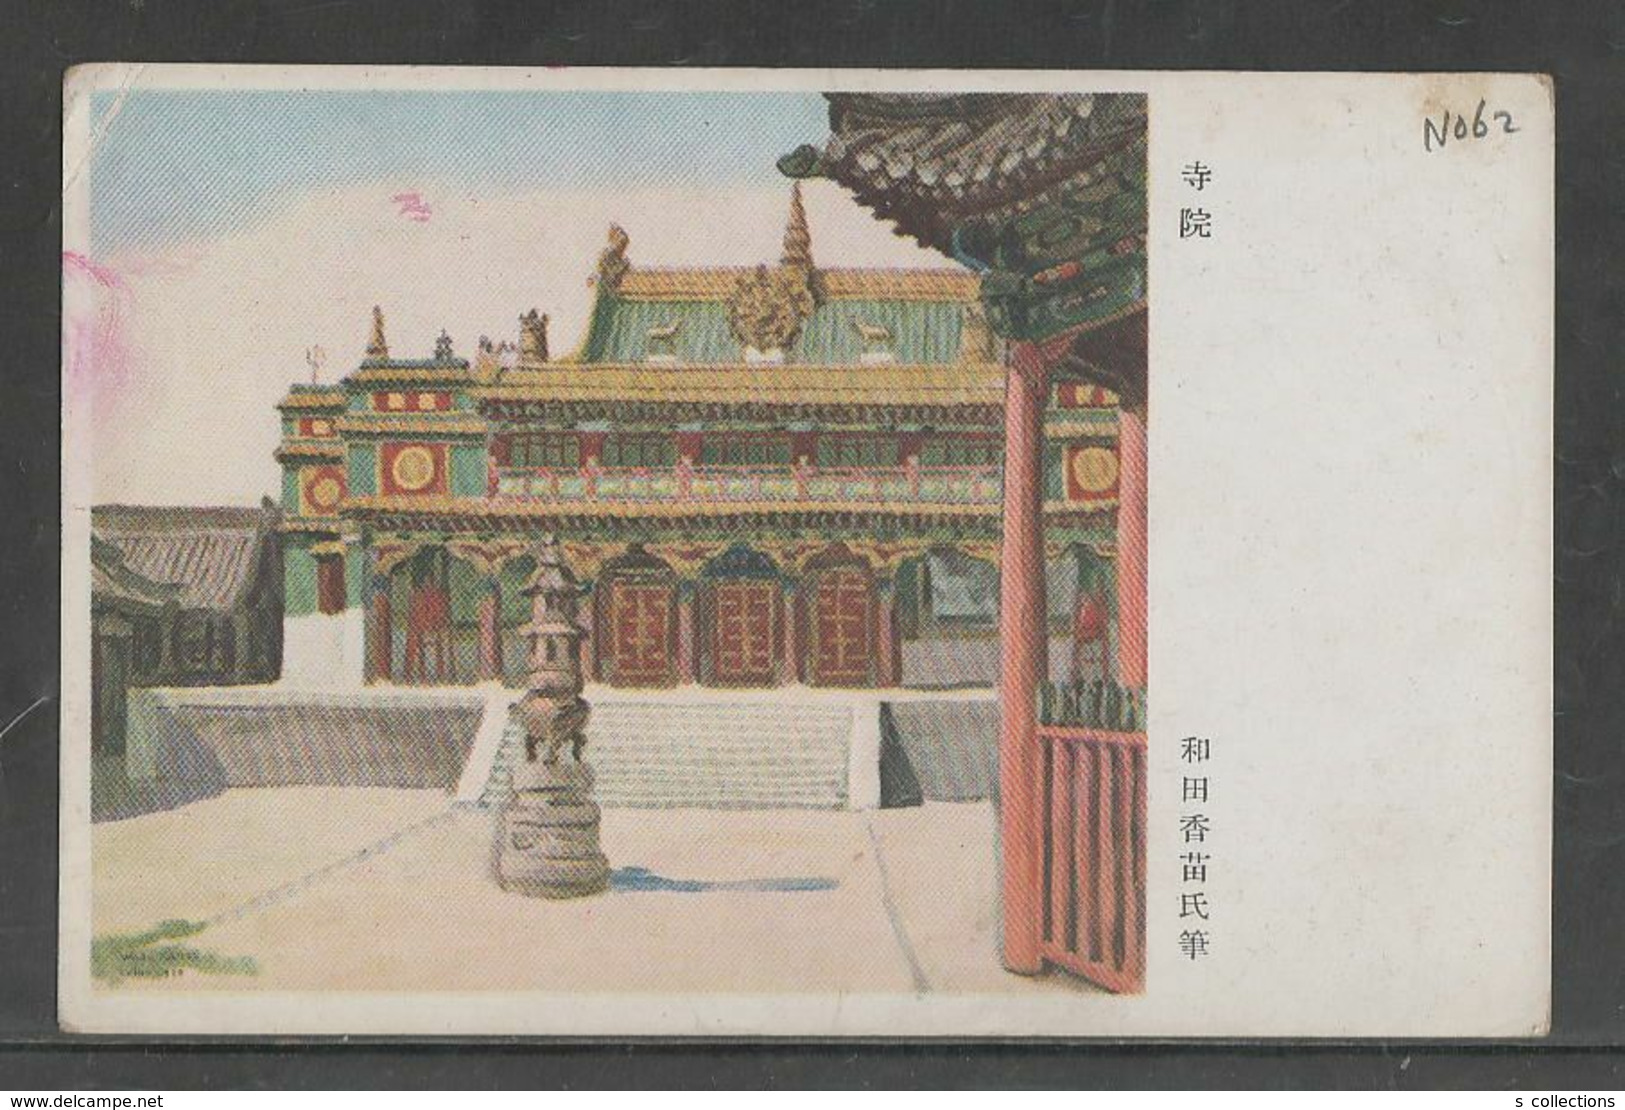 JAPAN WWII Military Temple Picture Postcard CENTRAL CHINA WW2 MANCHURIA CHINE MANDCHOUKOUO JAPON GIAPPONE - 1943-45 Shanghai & Nankin